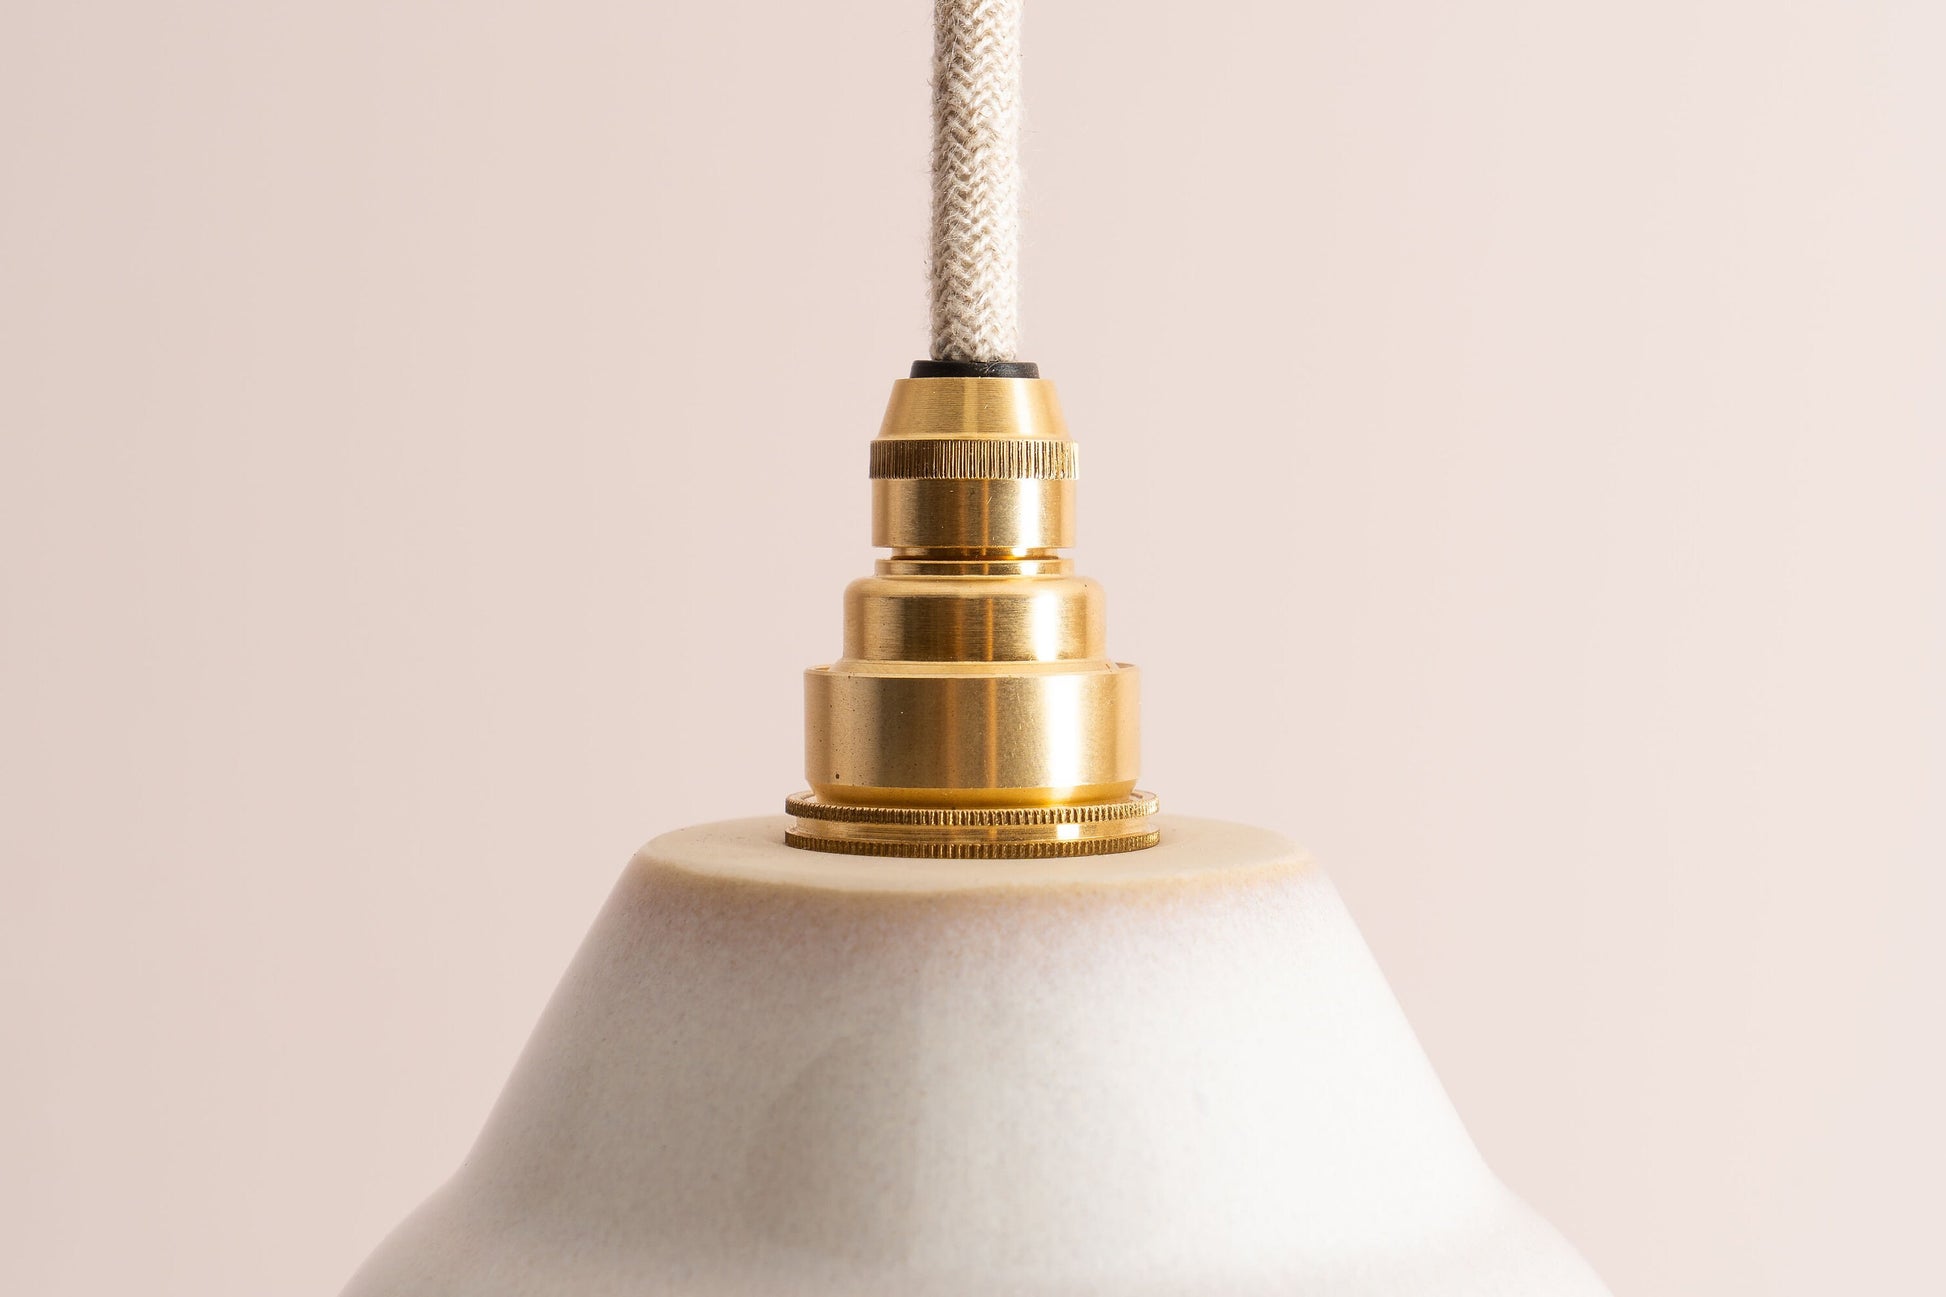 Small Blue and White Element Pendant Light in Ceramic and Brass by StudioHaran